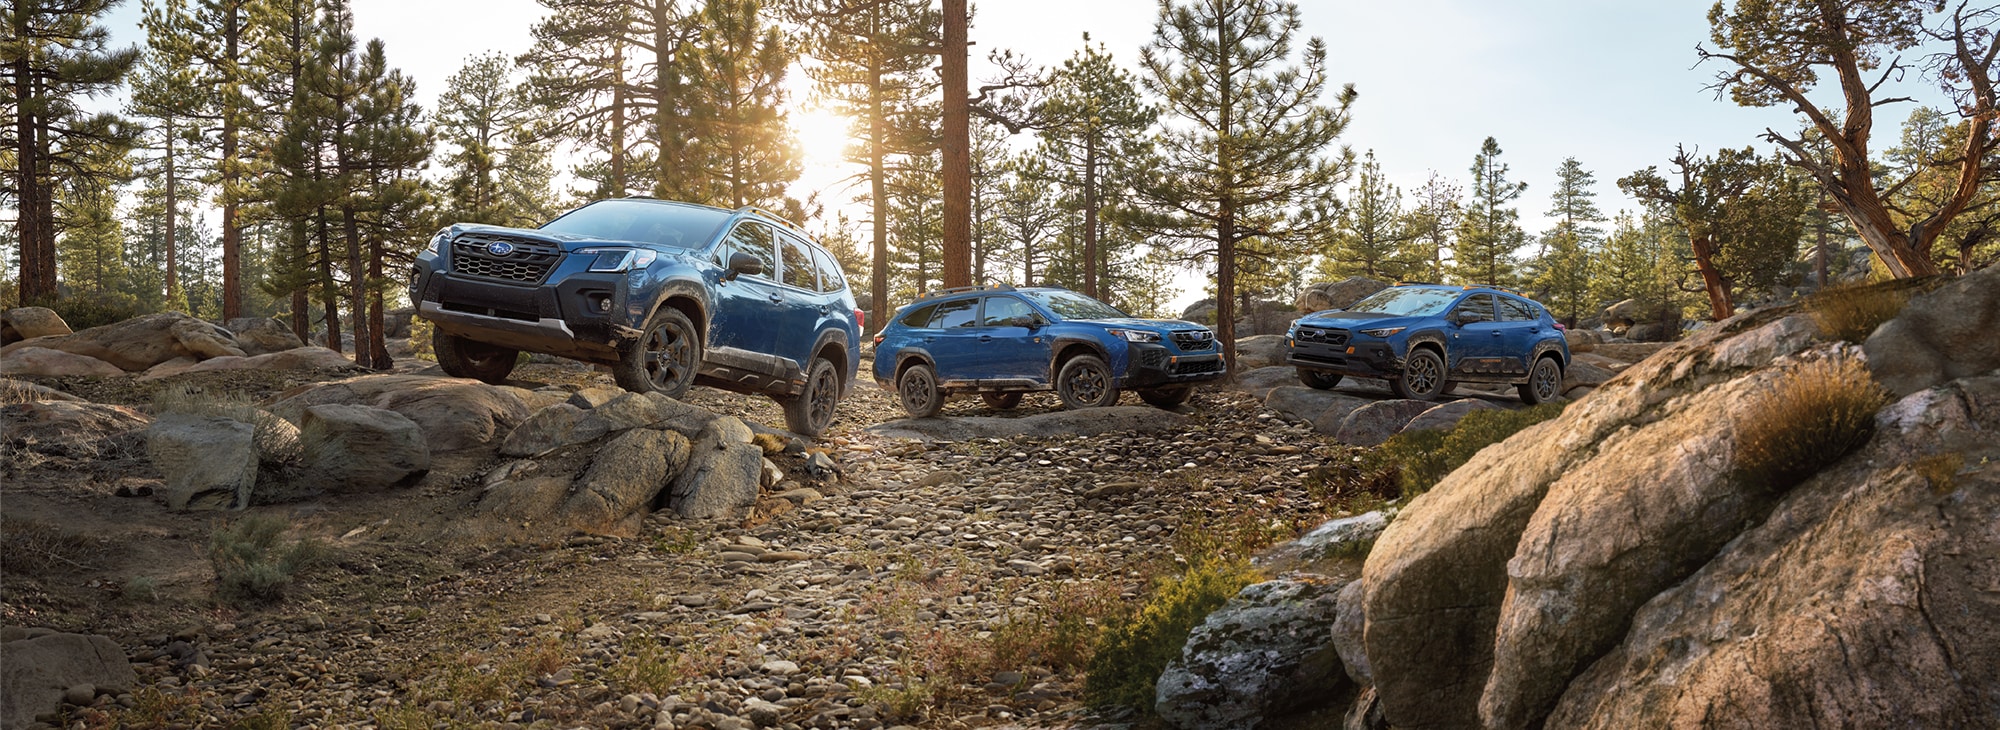  2024 Outback Wilderness, 2024 Forester Wilderness, and 2024 Crosstrek Wilderness in a Family of Vehicles shot in the woods